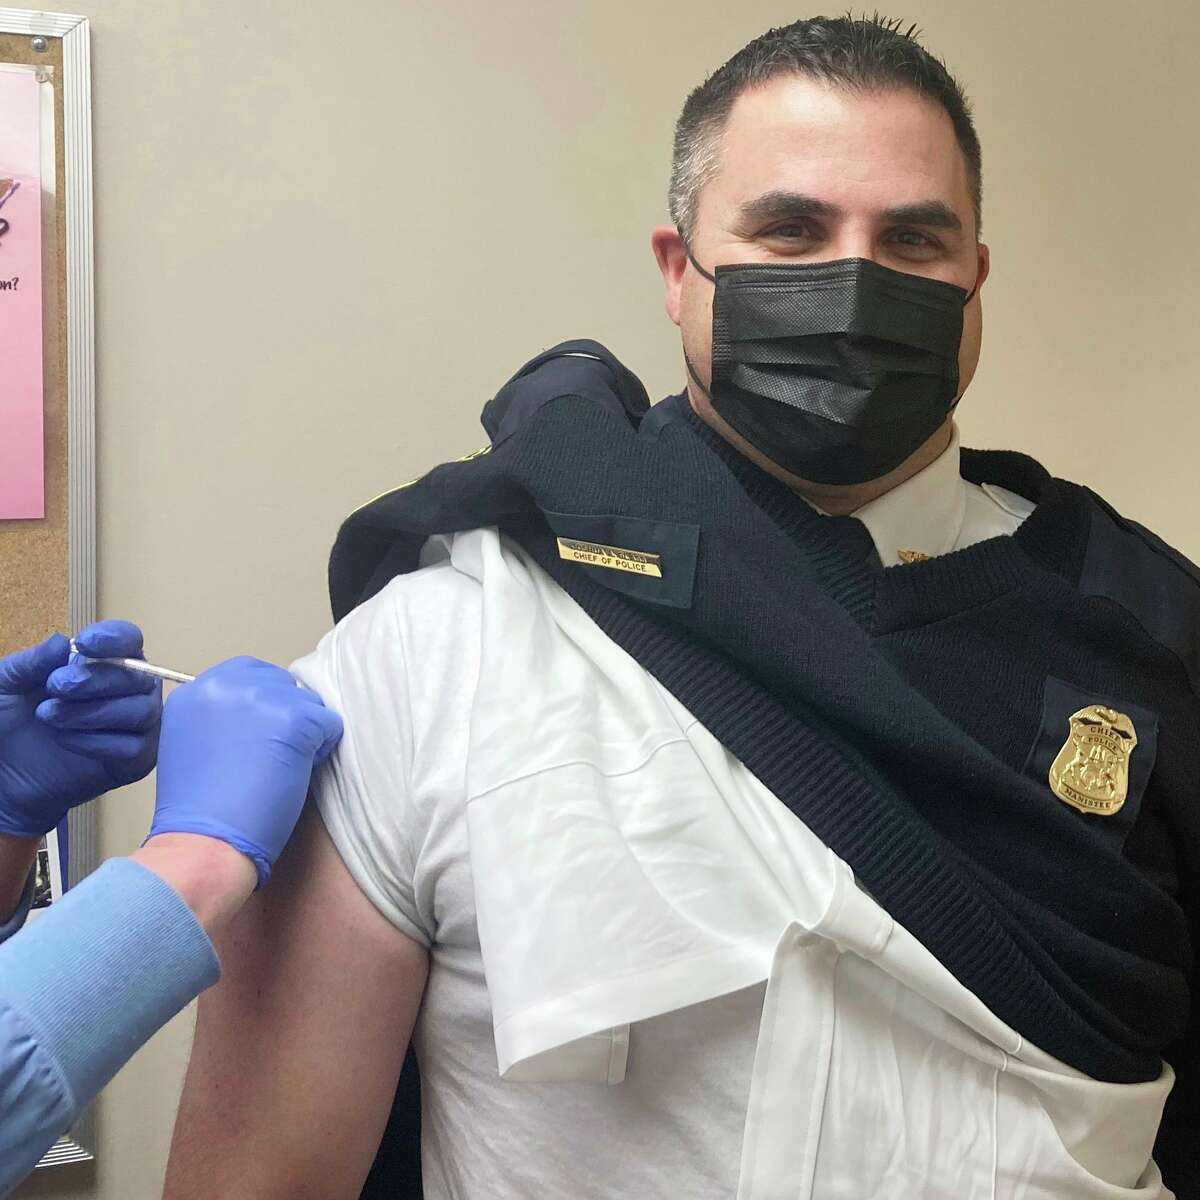 Josh Glass, Manistee City Police chief, smiles behind his mask while getting the second dose of the COVID-19 vaccine on Wednesday. (Courtesy photo)